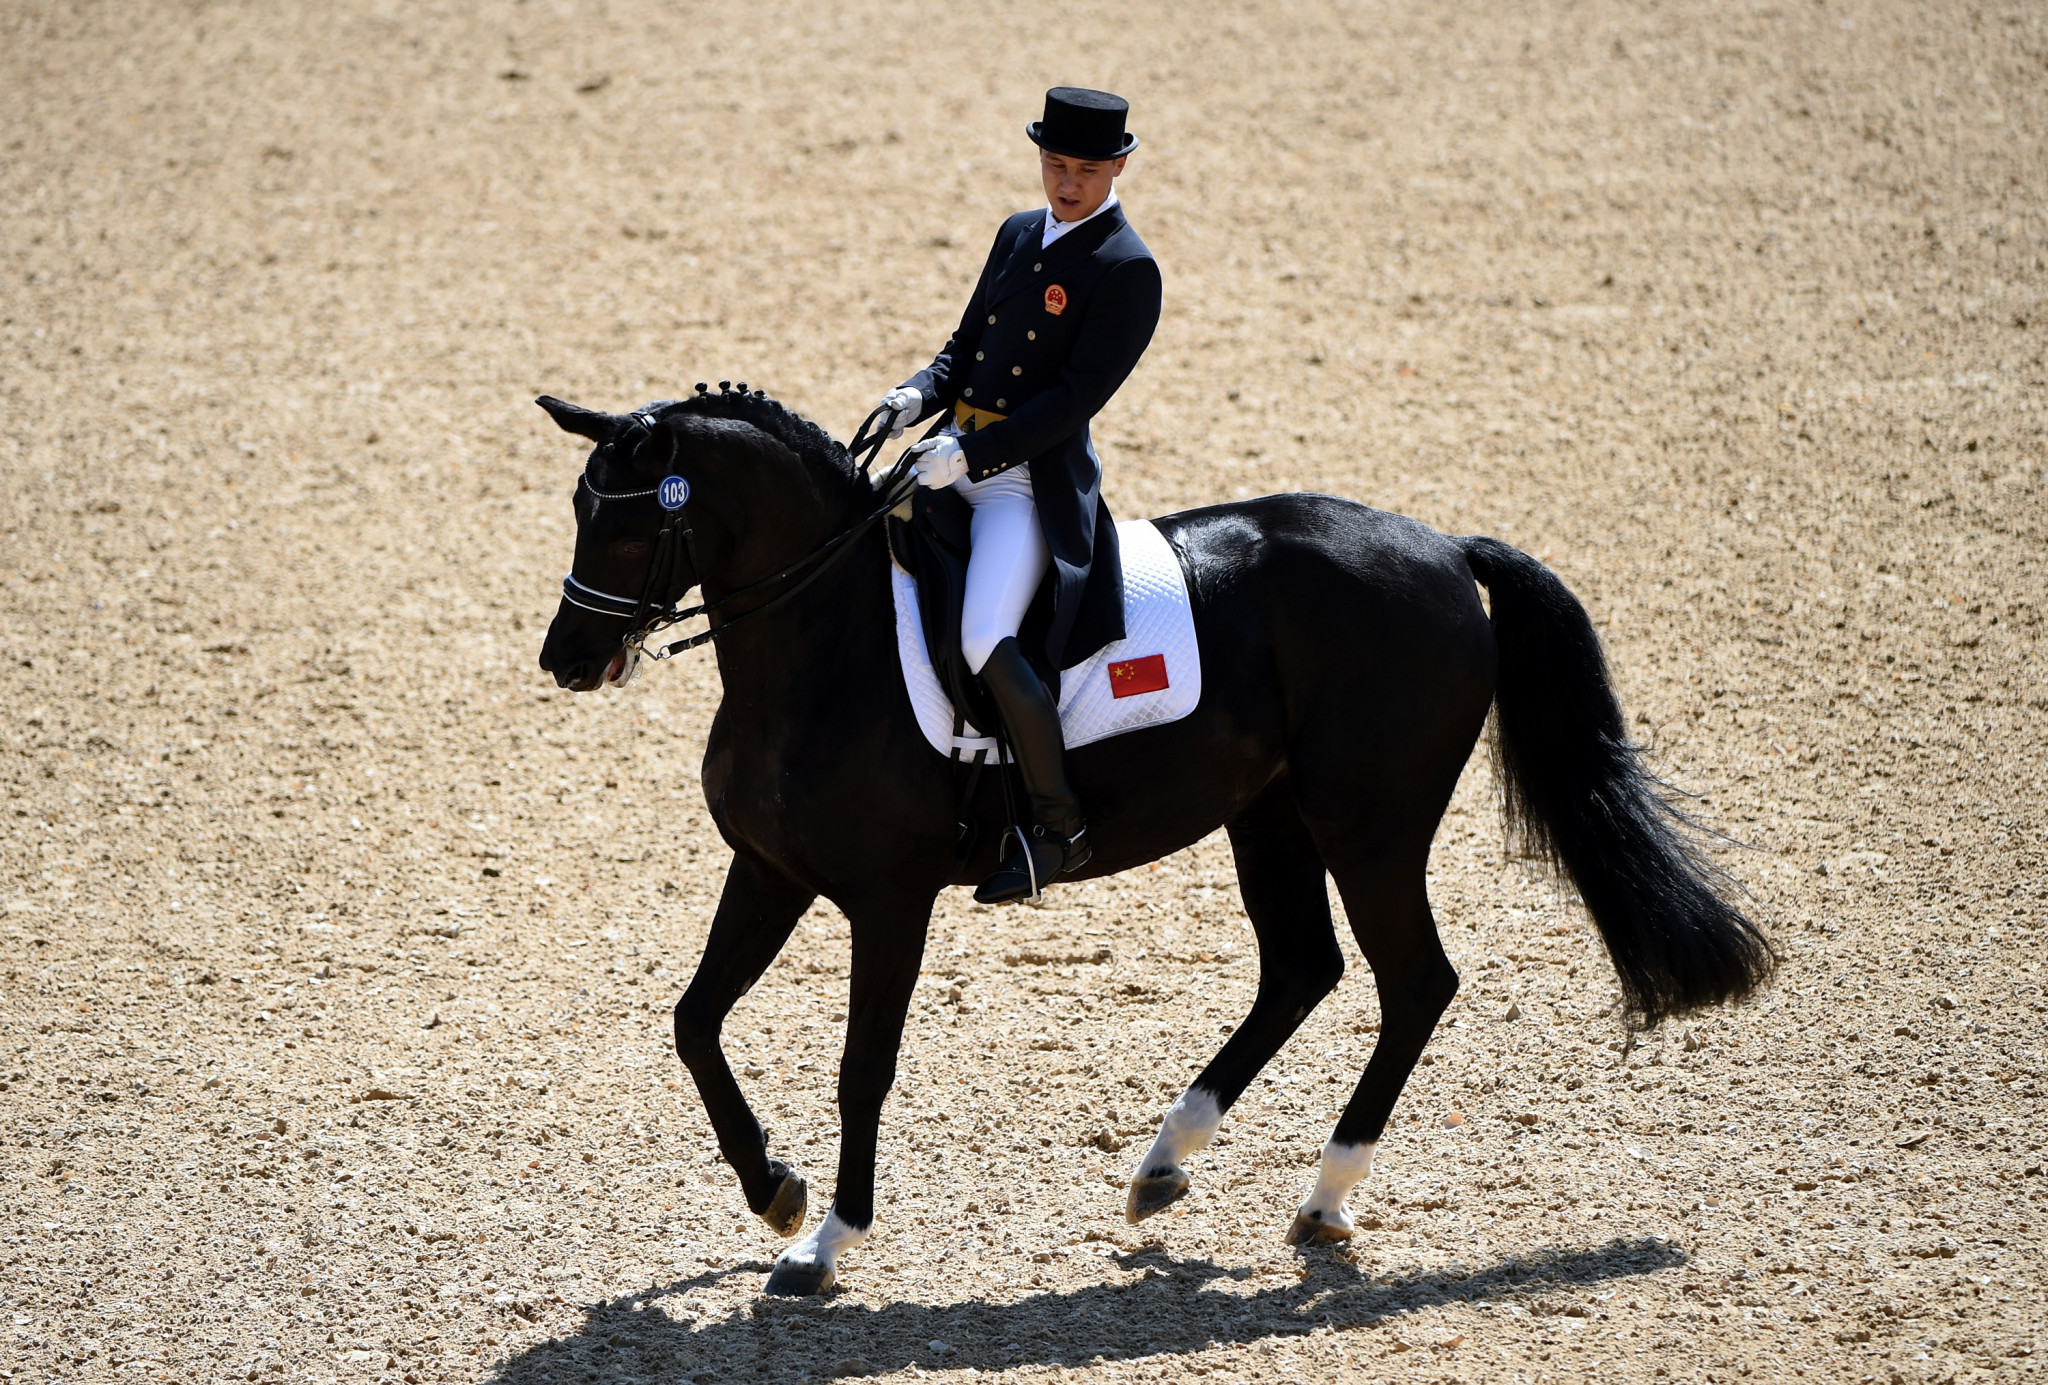 The Hangzhou International Equestrian Open is due to act as a test evet for the upcoming Asian Games ©Getty Images